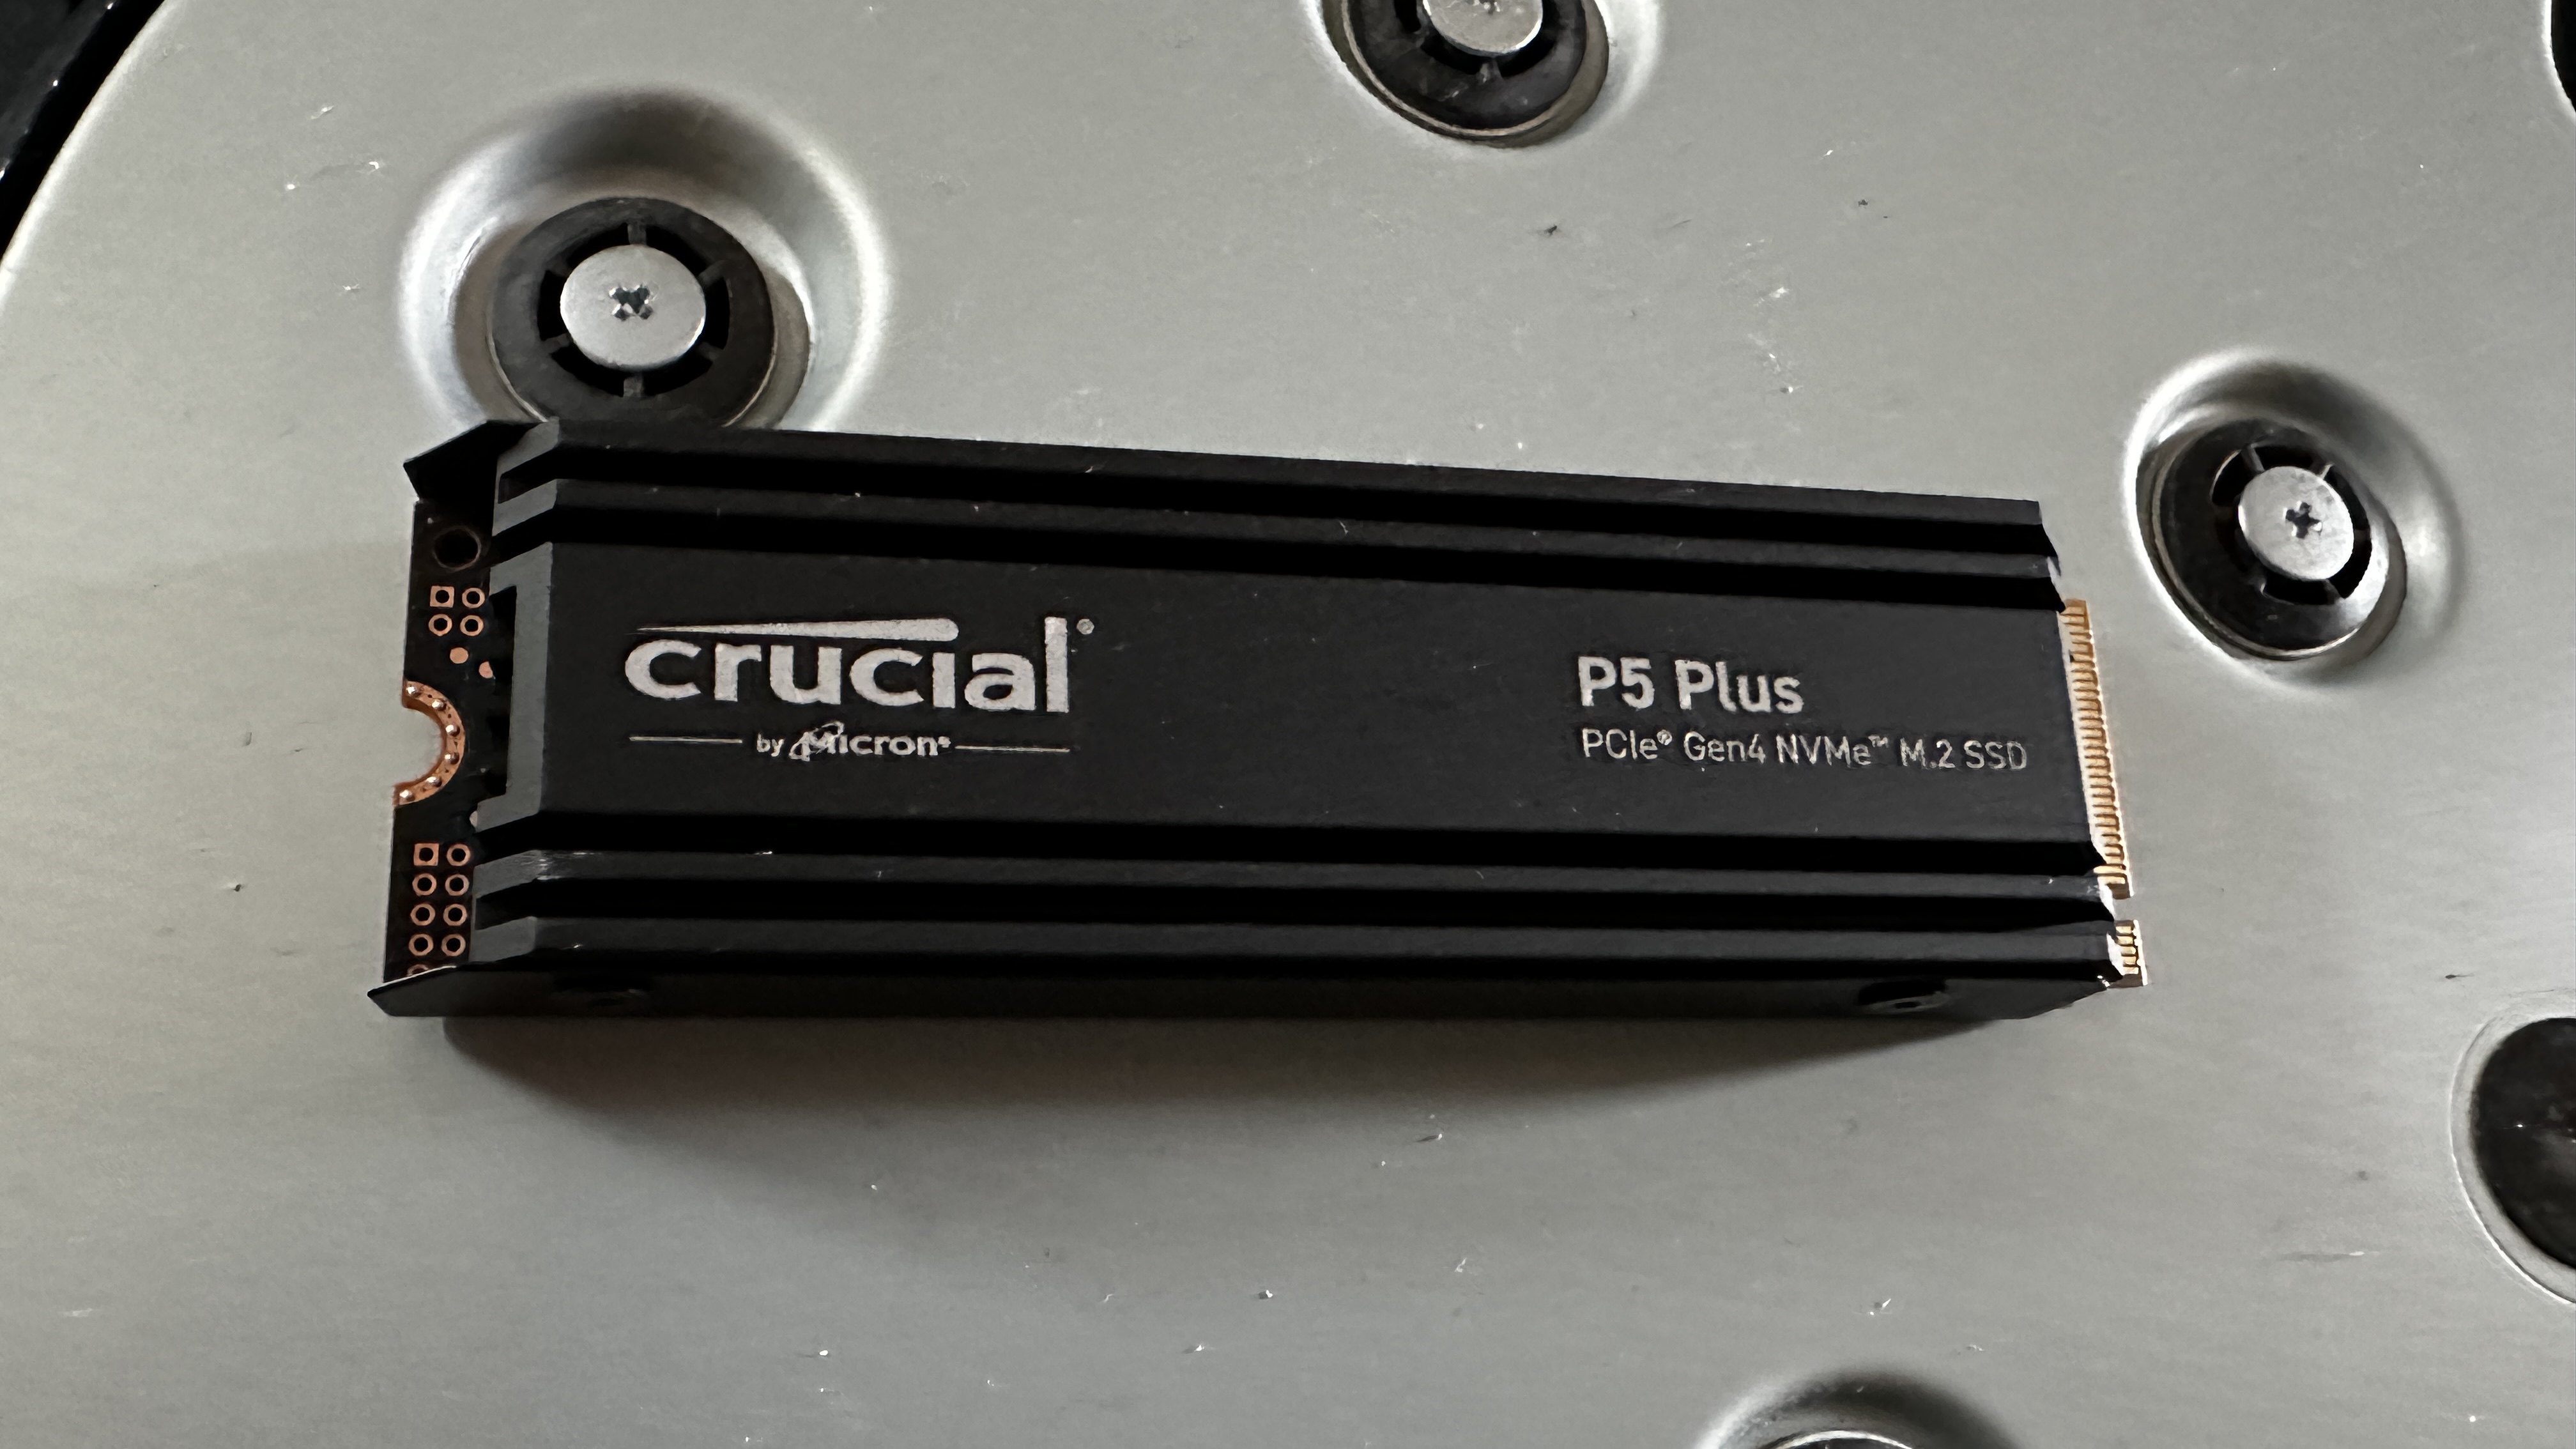 Crucial P5 Plus Review